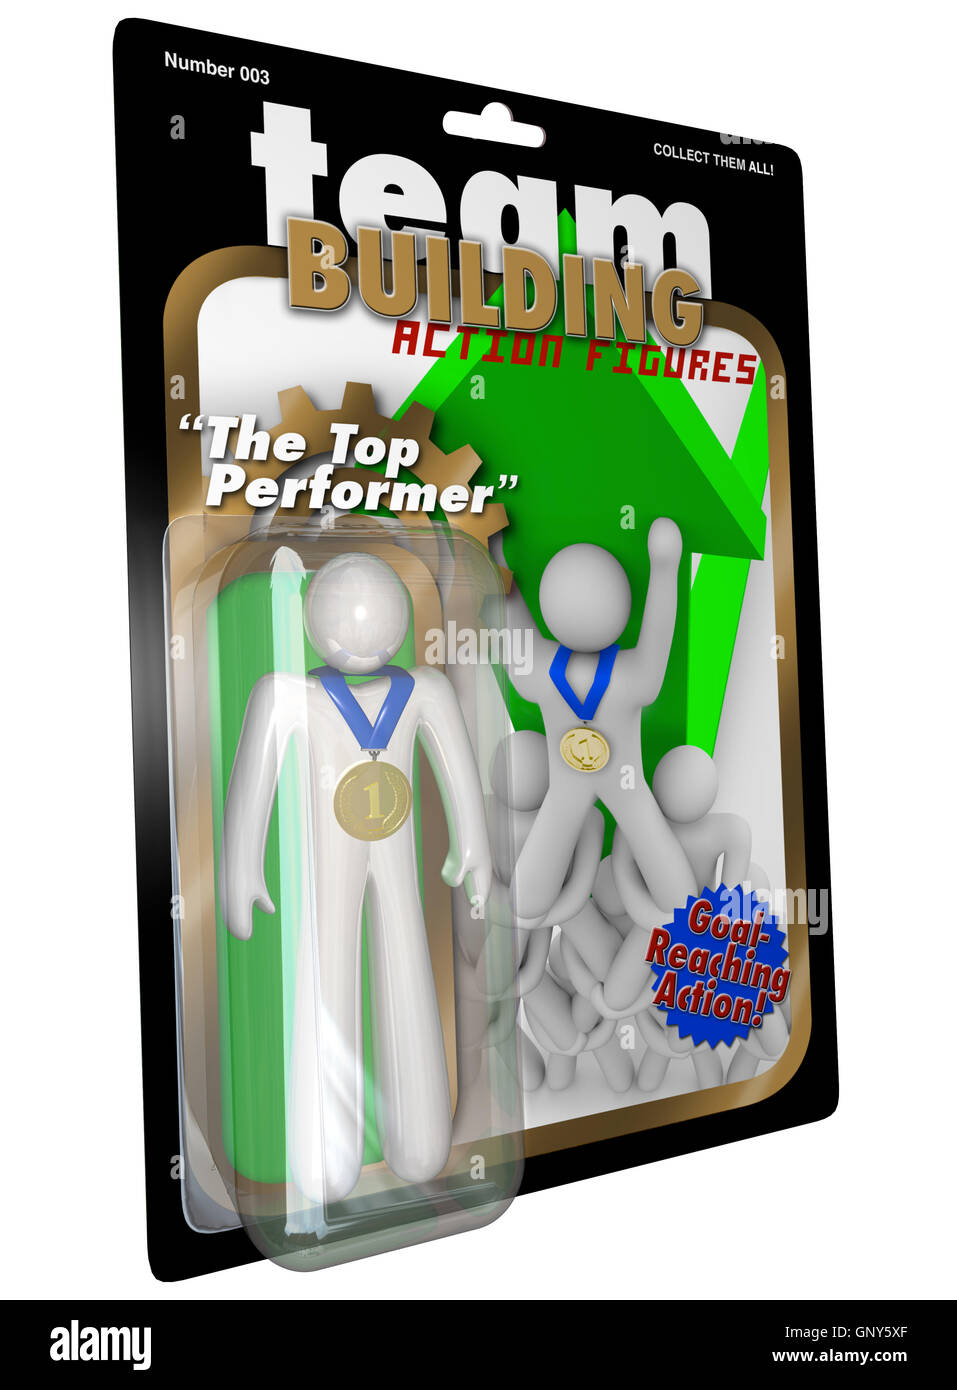 Top Performer Employee Action Figure Man in Package Stock Photo